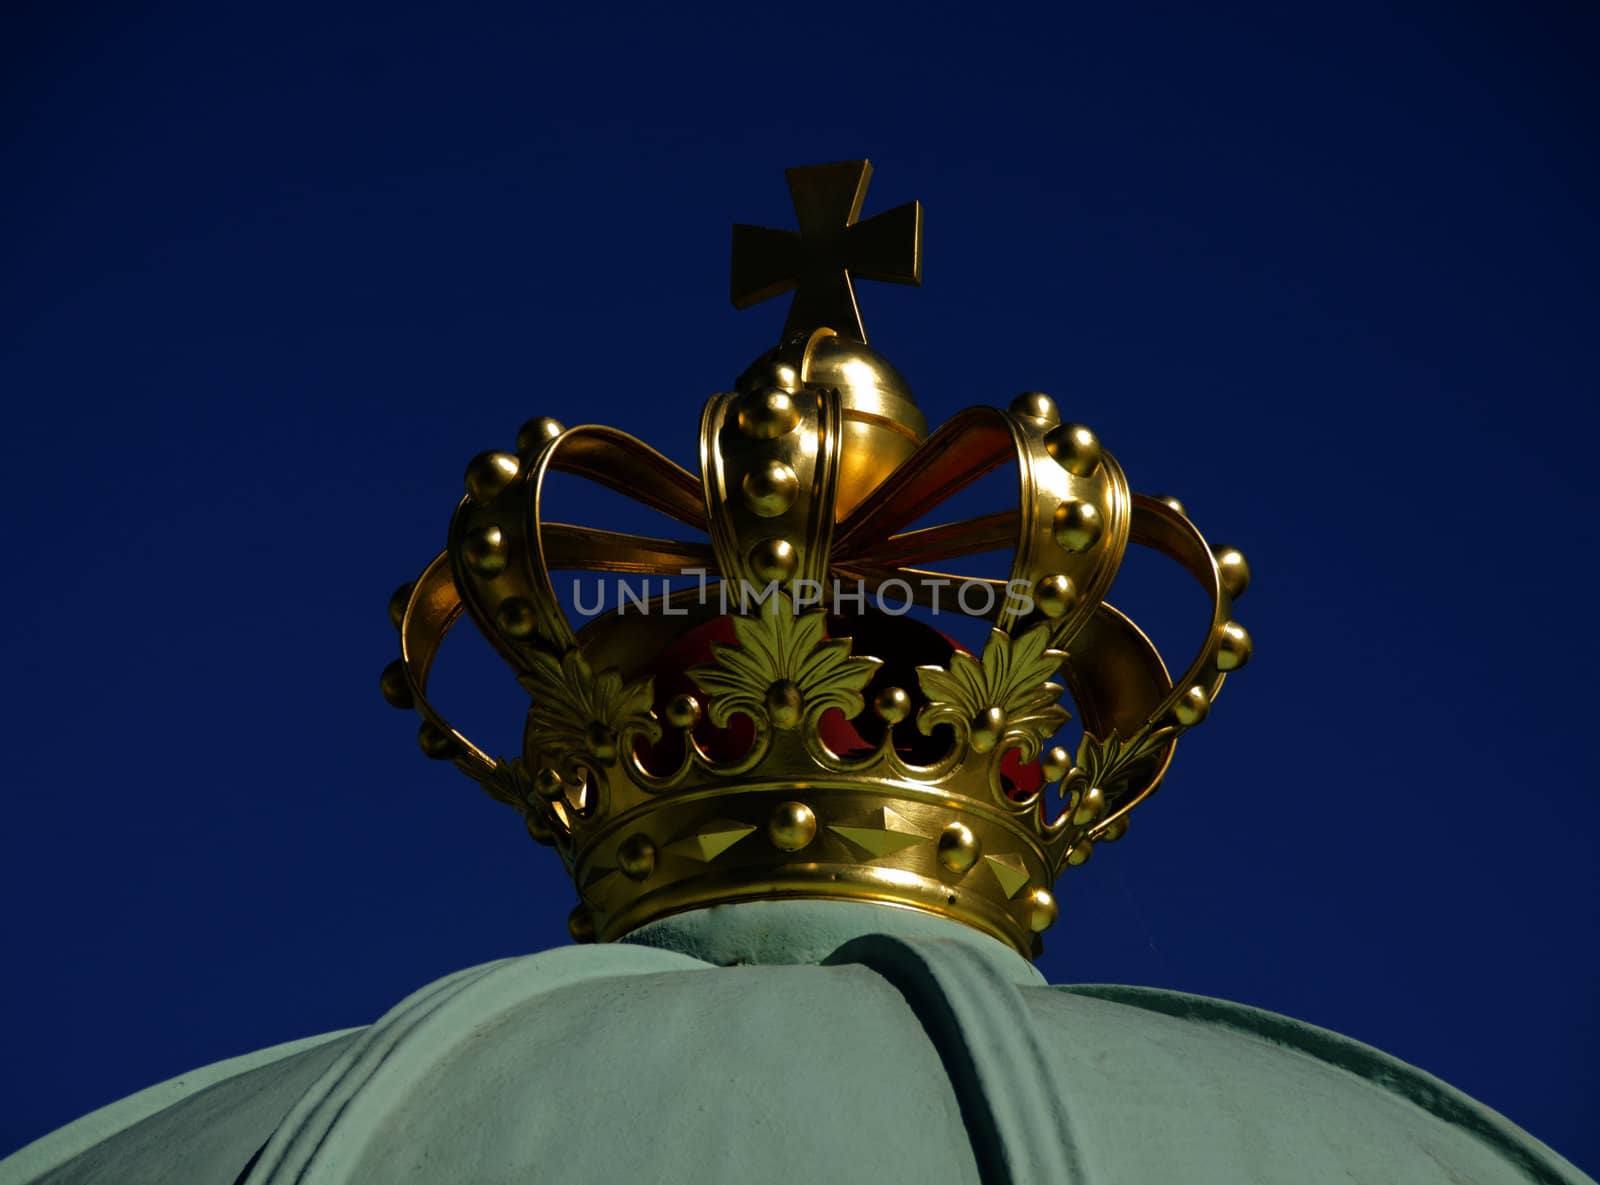 Gold Danish crown with blue sky behind